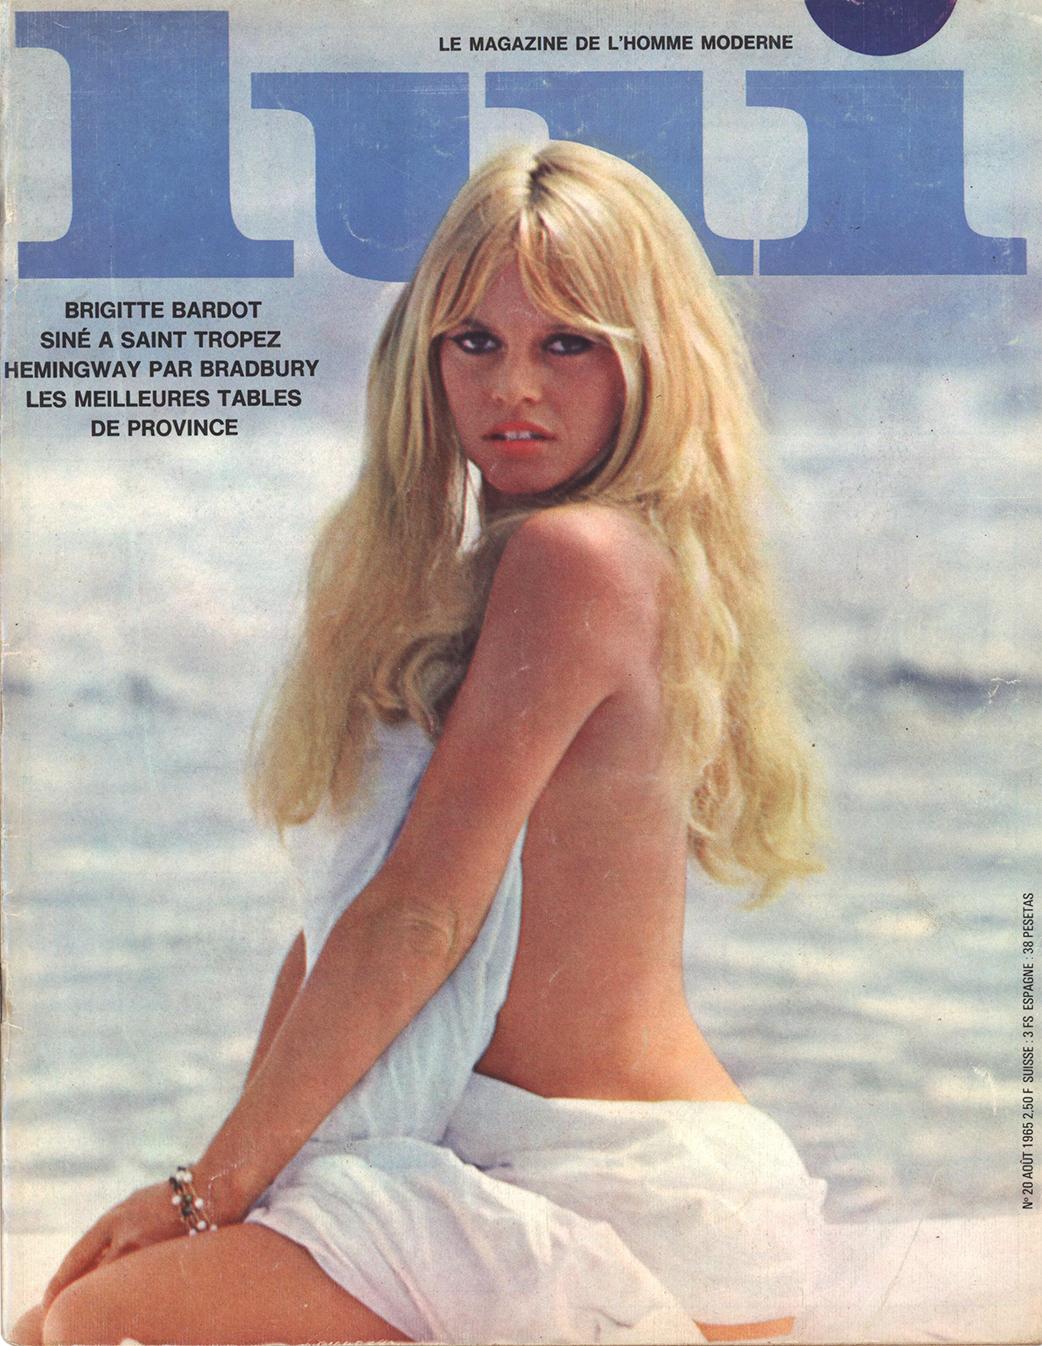 A brilliant set of 2 vintage original 1960's LUI magazines, featuring standout Brigit Bardot covers. Offered here are the full magazines; intact; in good overall vintage condition.

A perfect addition for the Serge Gainsbourg, Jean Luc Godard &